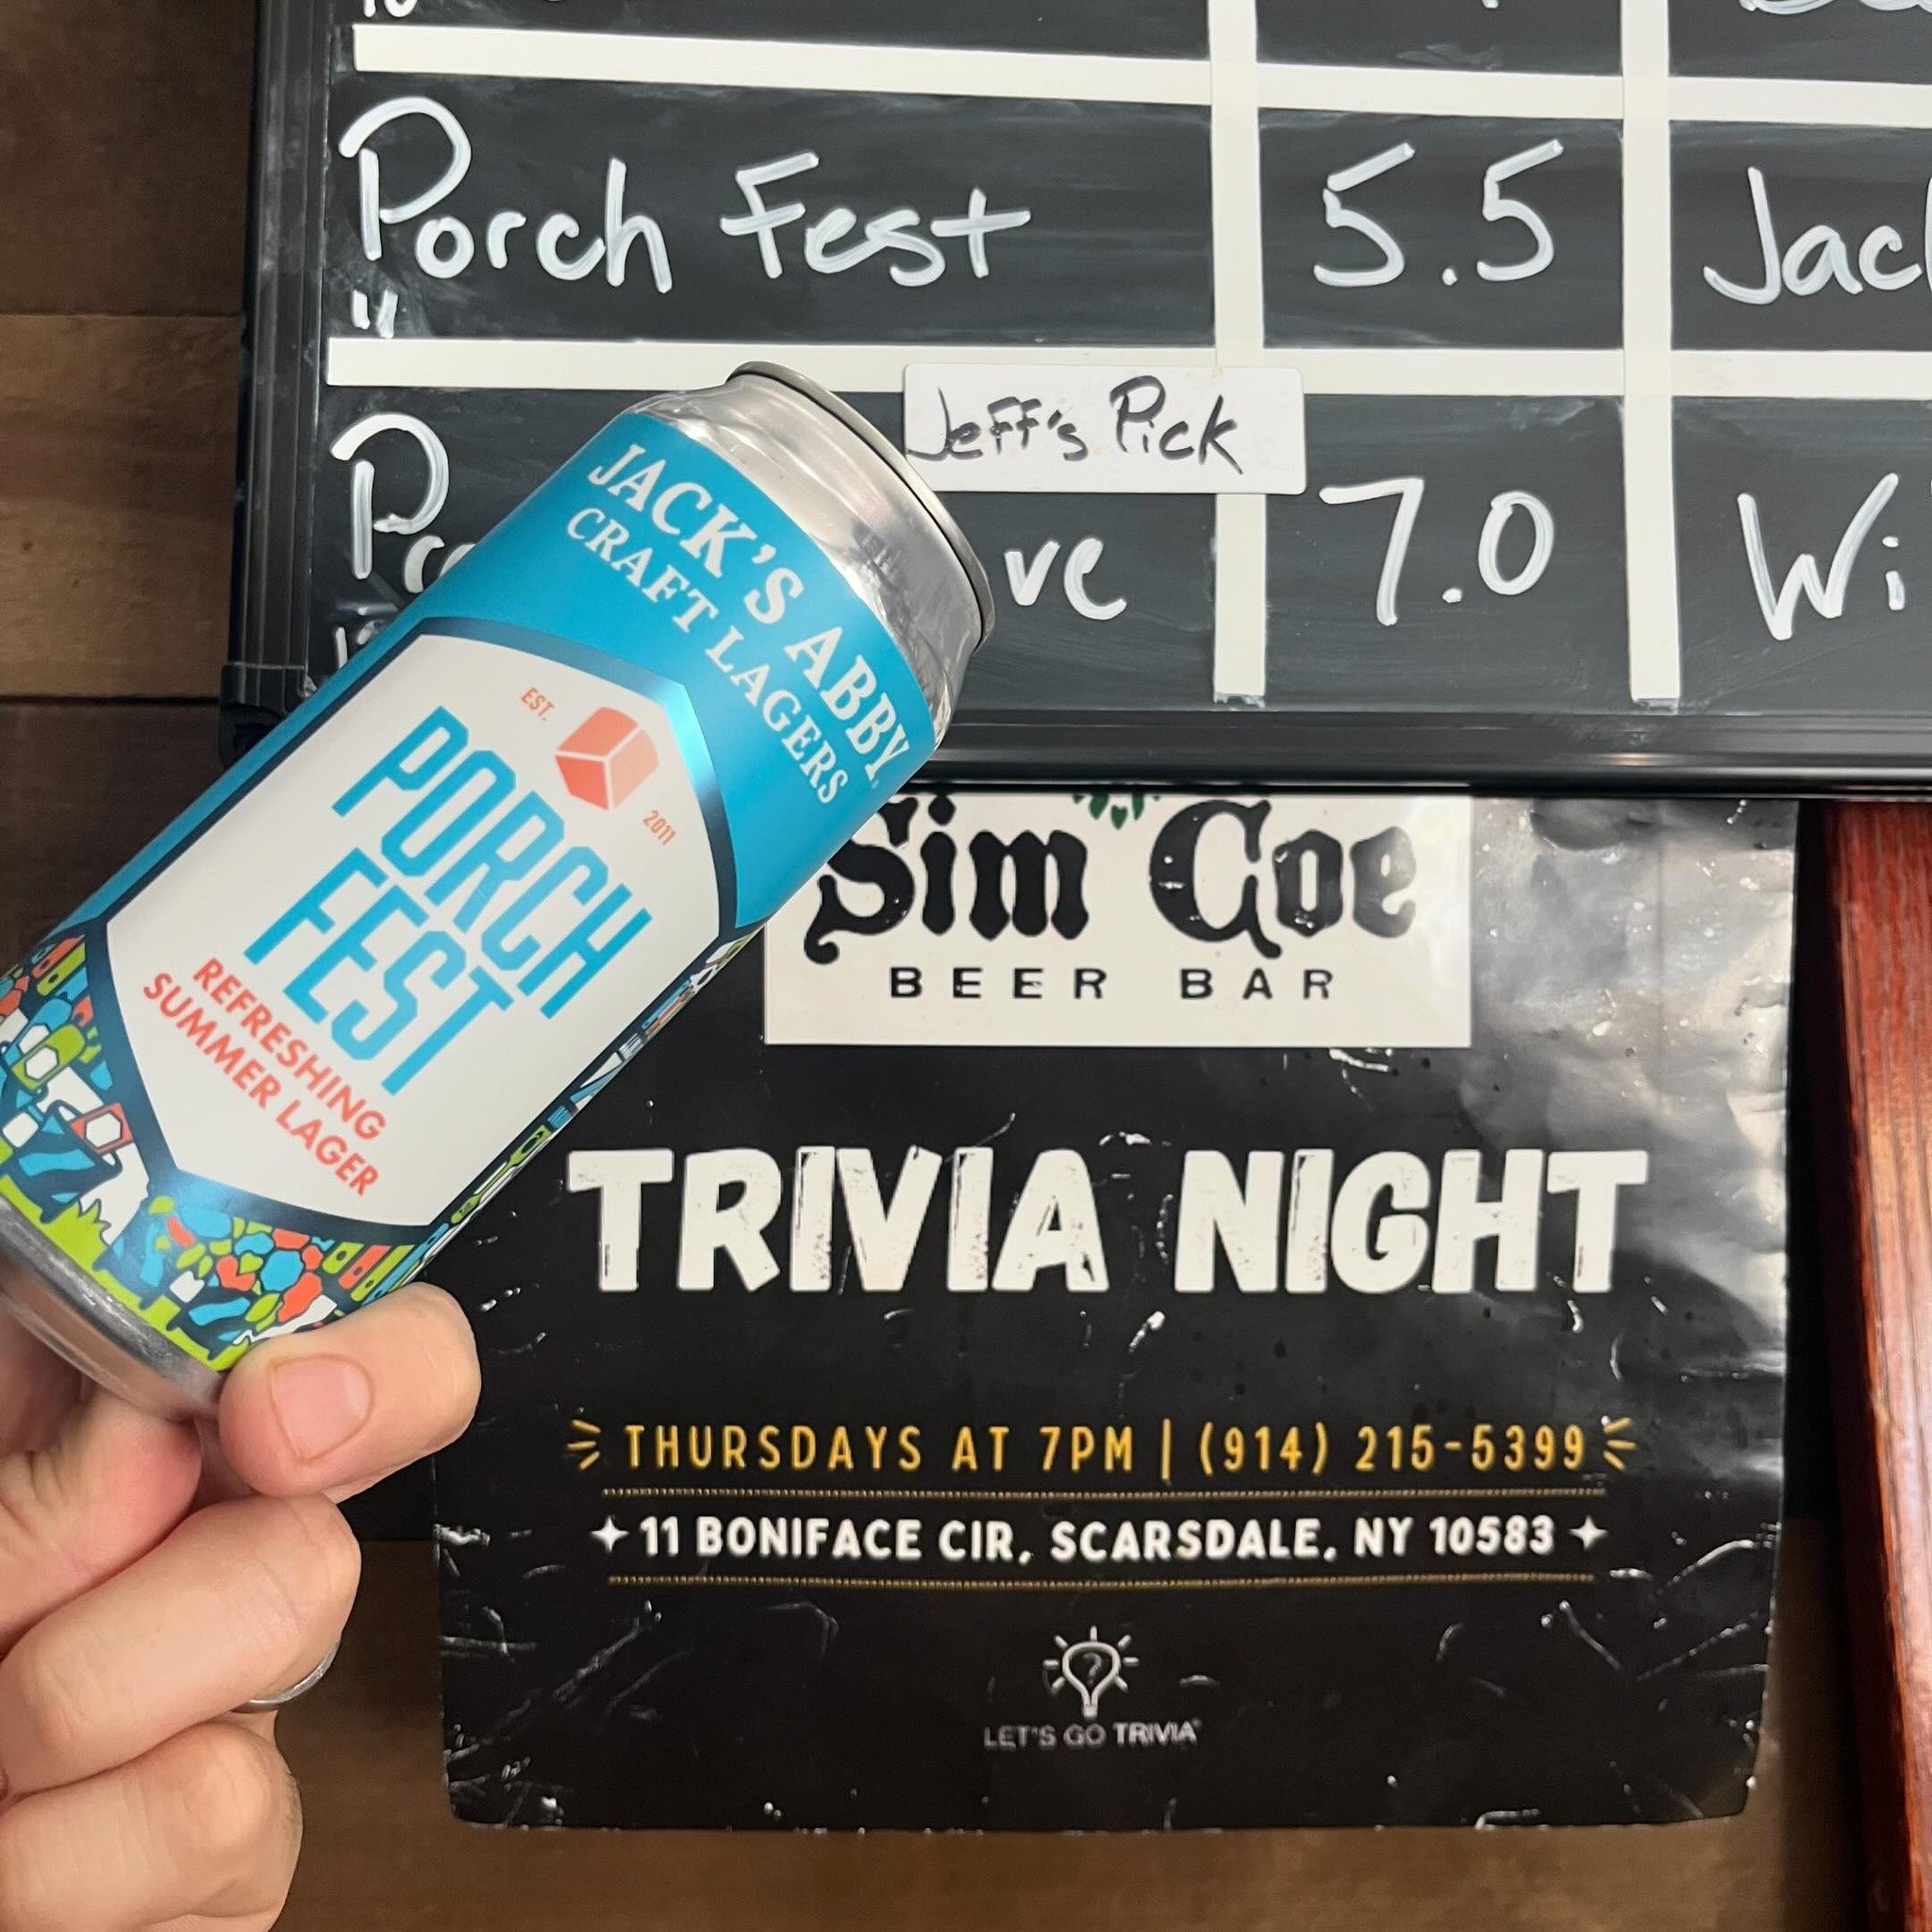 What's better than Trivia Night at Sim Coe? Sponsored Trivia Night at Sim Coe! 
.
Come through tonight to play some very fun trivia and meet some of the fine folks from Jack's Abby. One of those fine folks might even be a familiar face if you've been